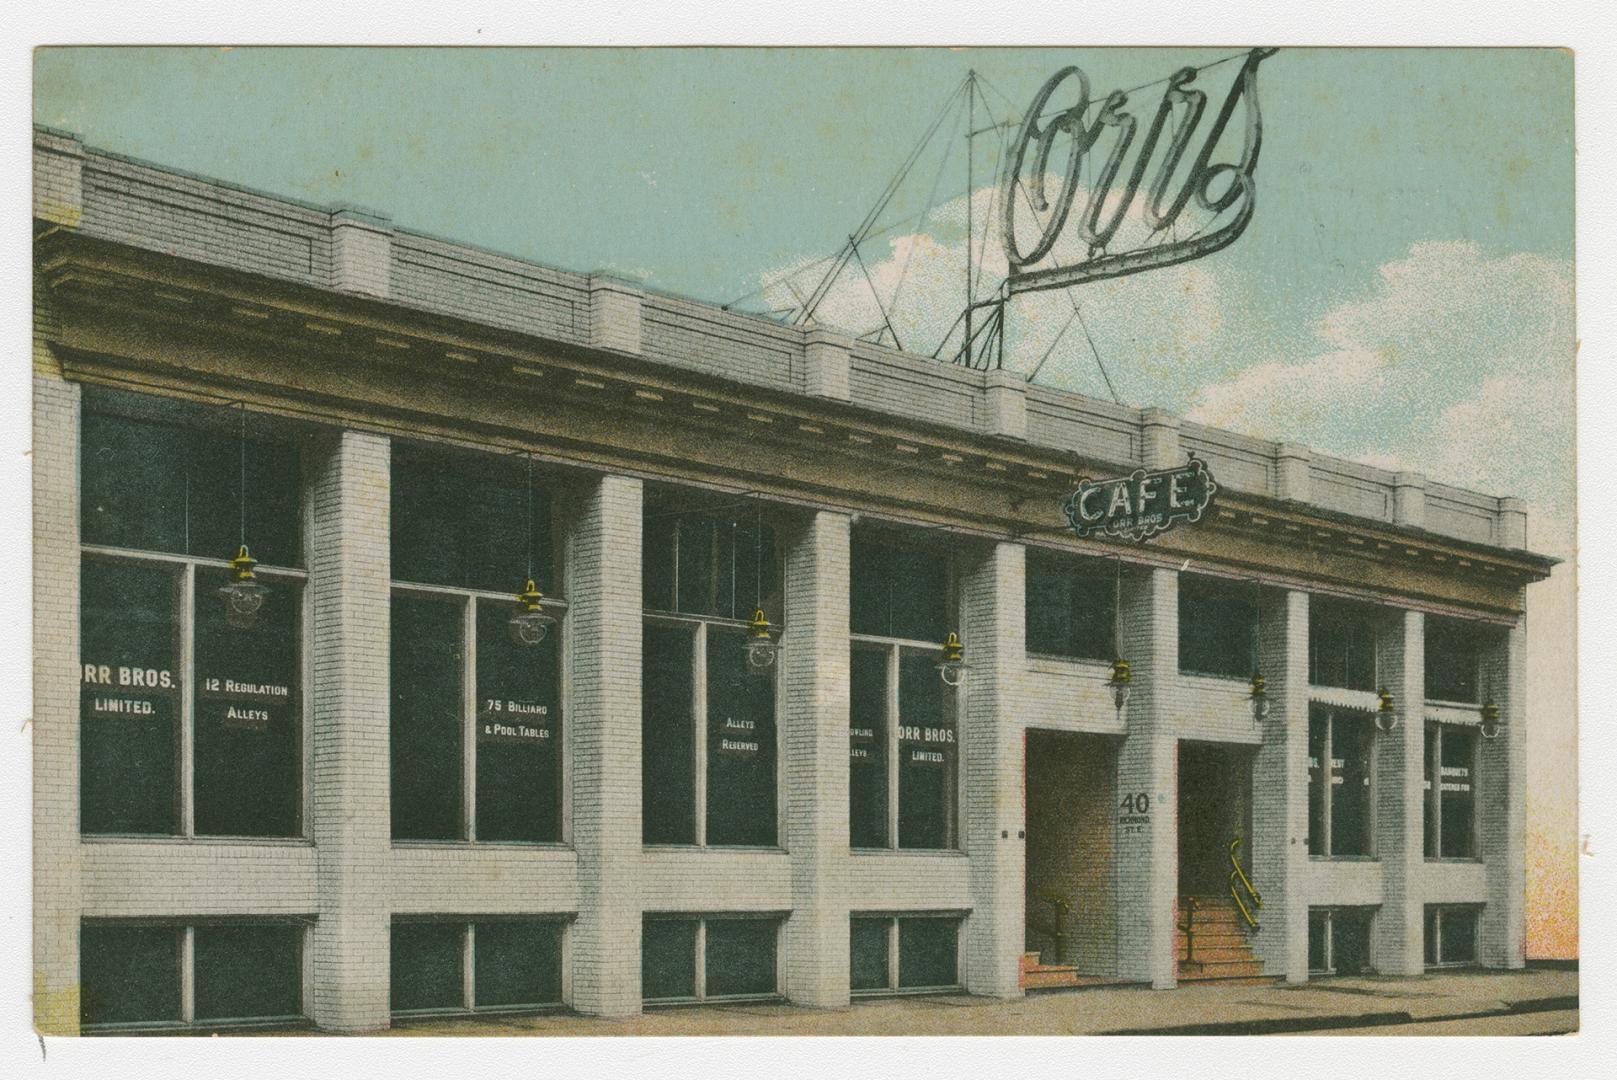 Picture of a cafe with sign on top of building. 